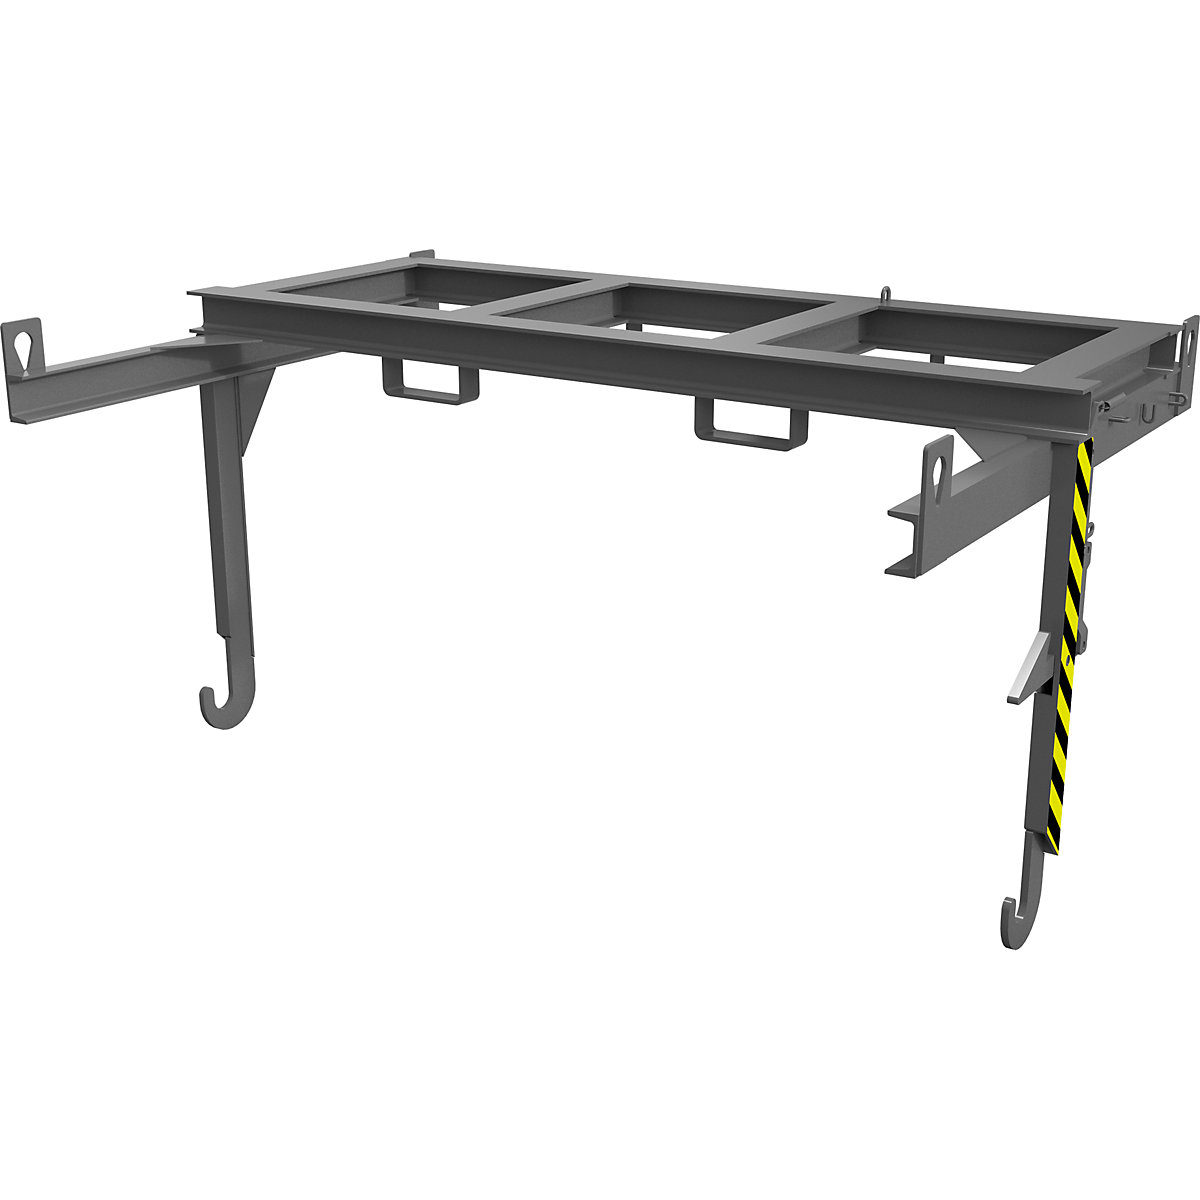 Forklift support bar for tilting skips and stacking containers – eurokraft pro, for cranes, max. load 2000 kg, for container size 2 m³